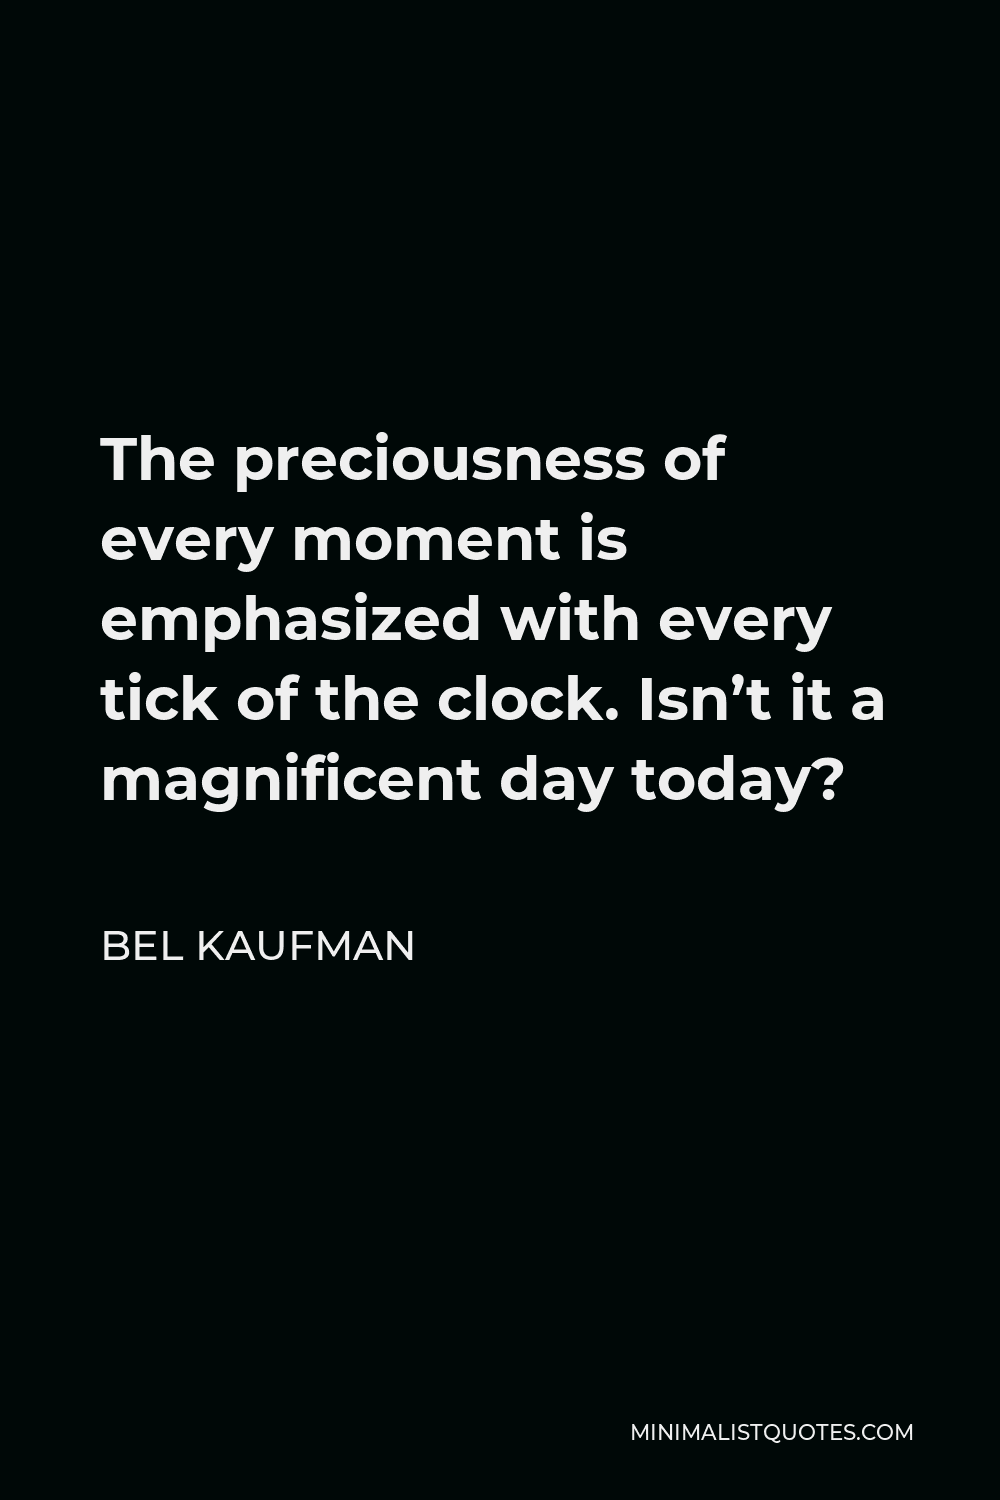 Bel Kaufman Quote - The preciousness of every moment is emphasized with every tick of the clock. Isn’t it a magnificent day today?